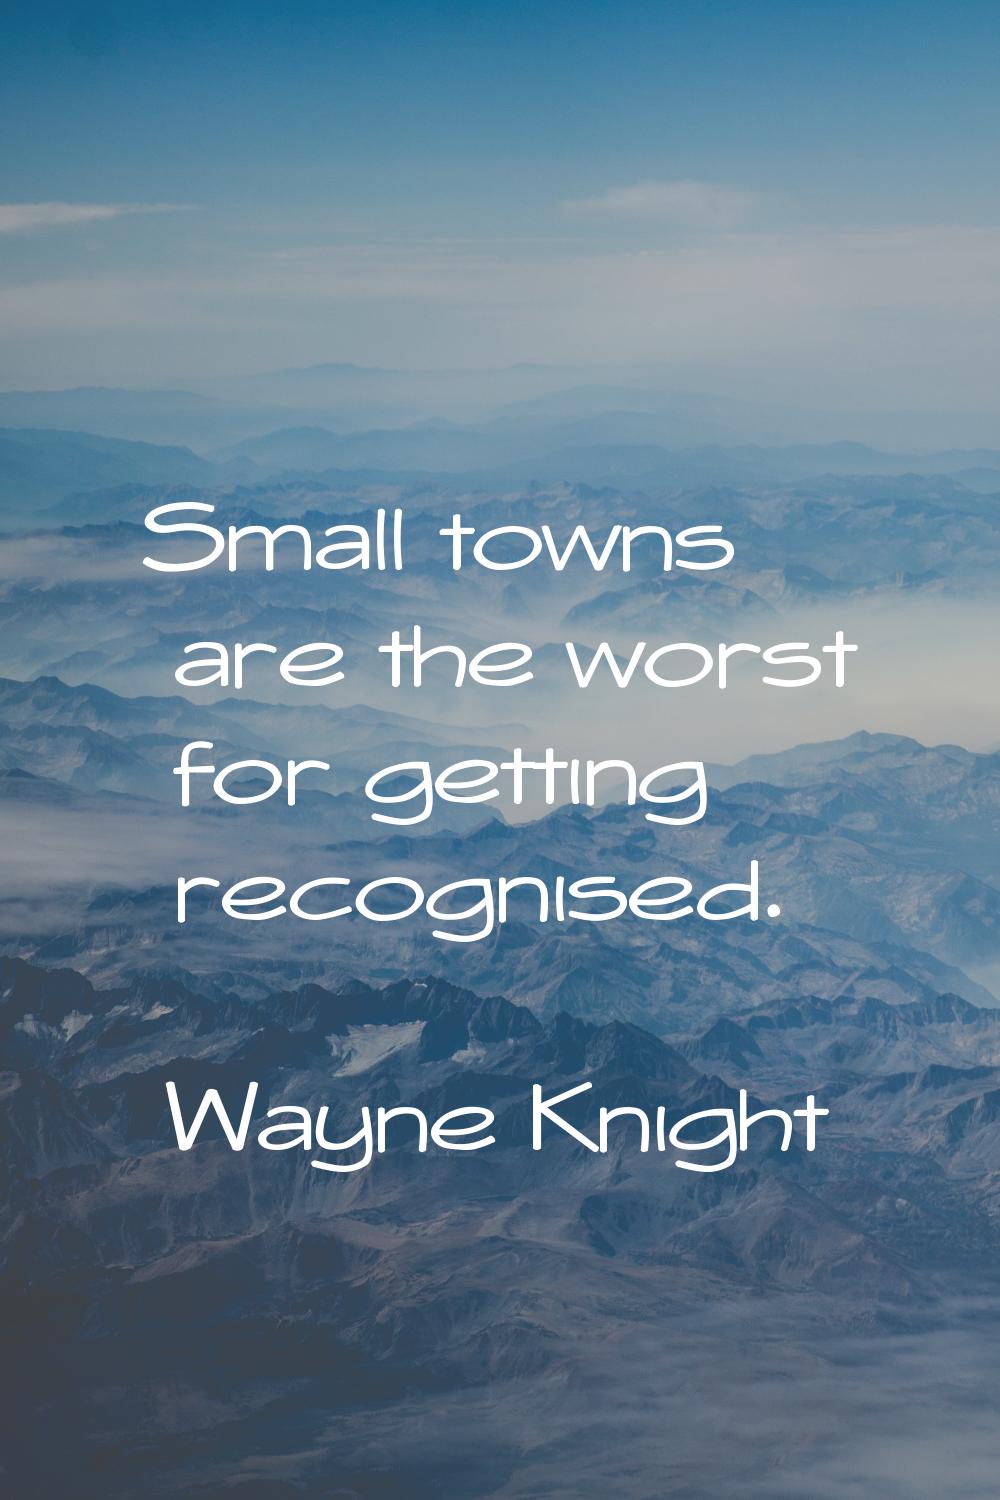 Small towns are the worst for getting recognised.